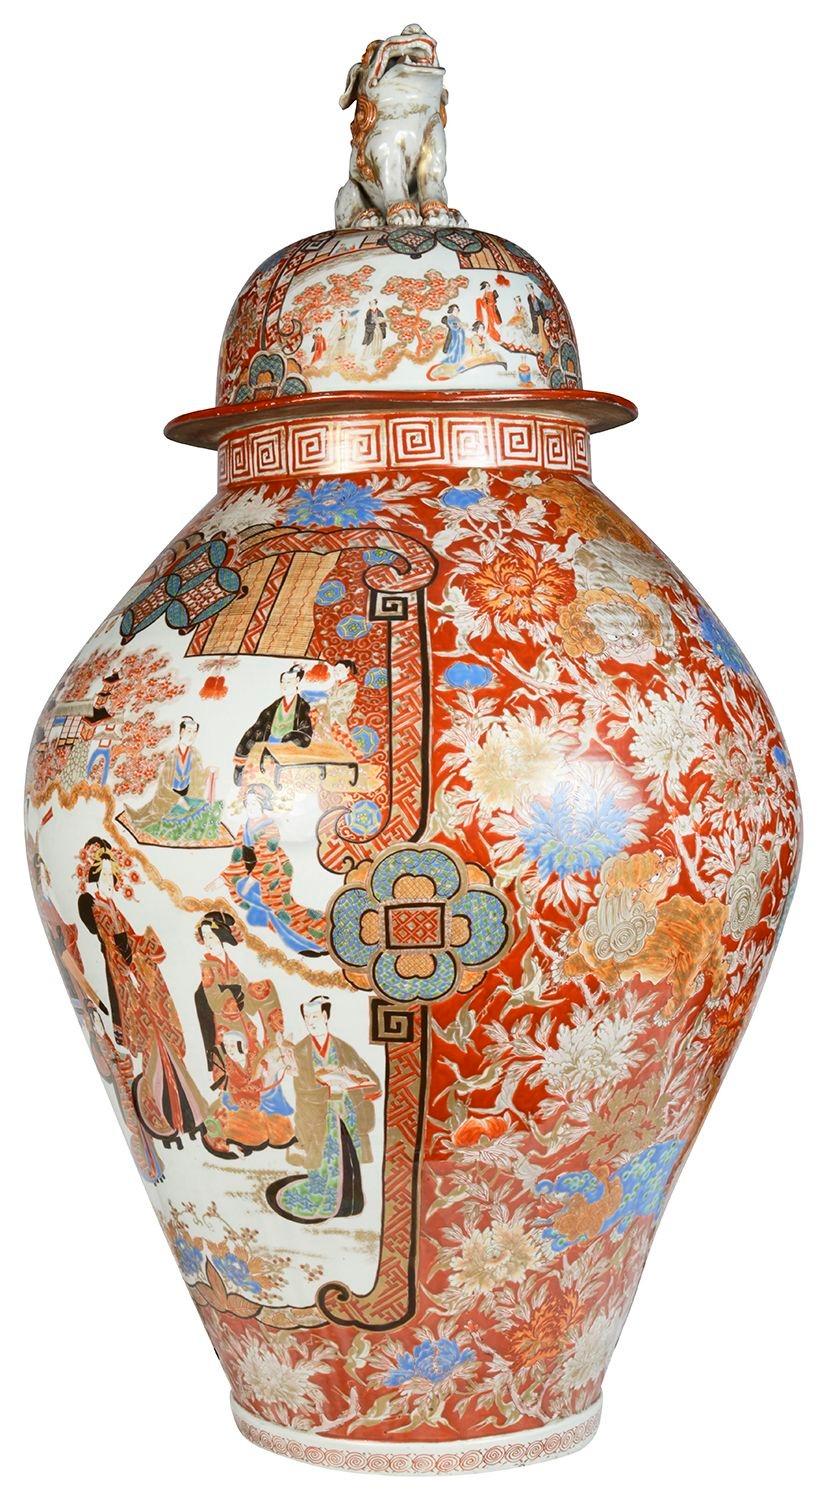 A large and impressive 19th Century Japanese Imari lidded vase. Having a wonderful mythical Foo Dog finial to the lid, classical orange ground with scrolling foliate and floral decoration, inset hand painted panels depicting Geisha girls and